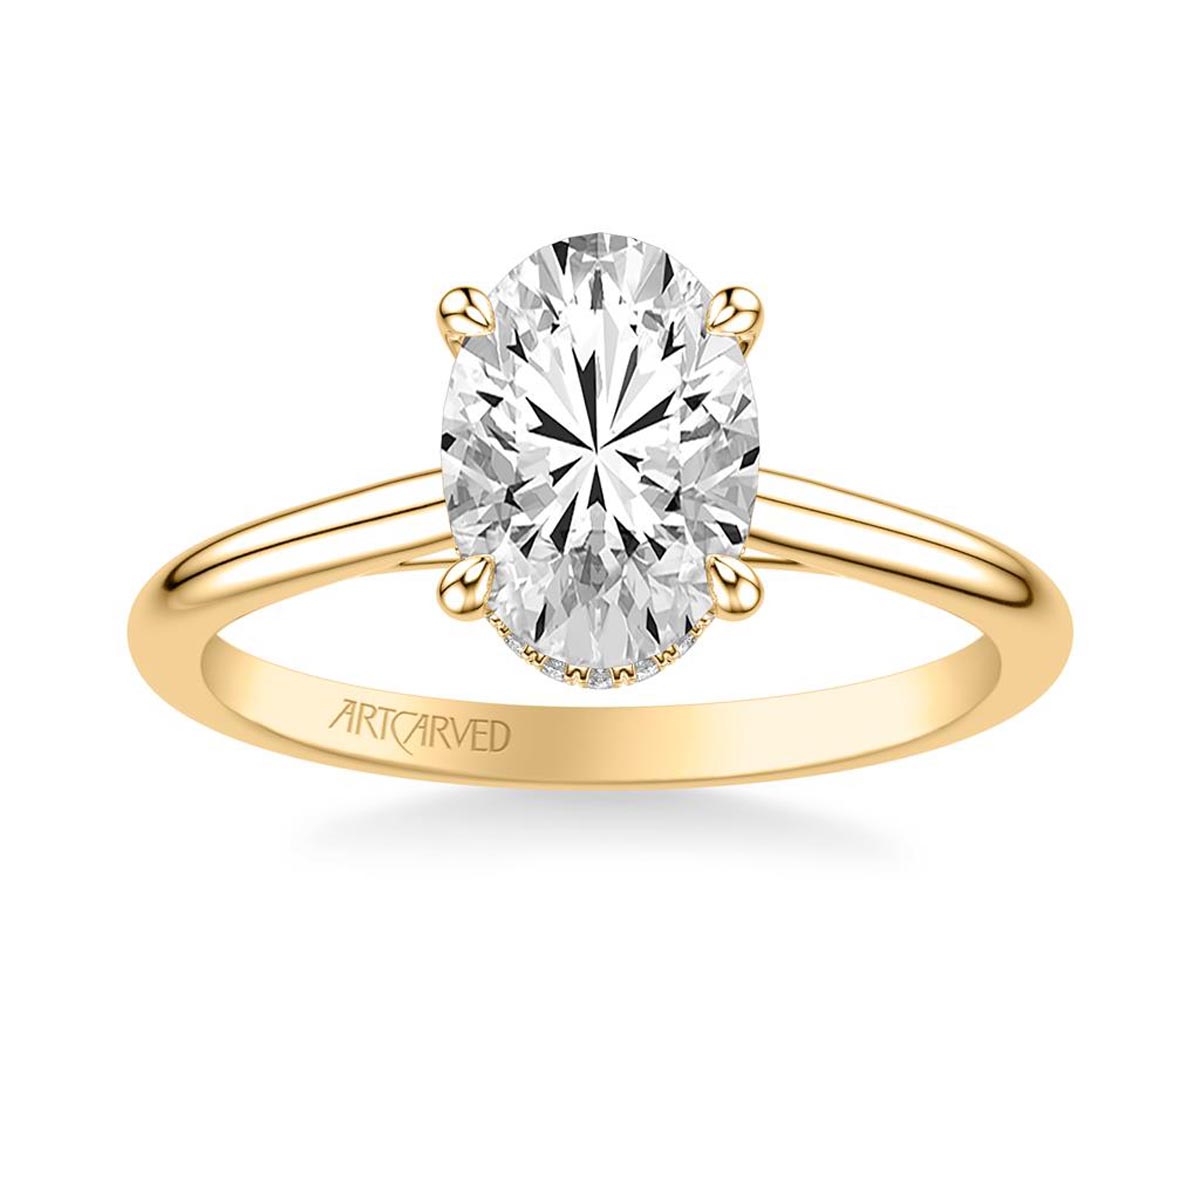 Artcarved Diamond Engagement Ring Setting in 14kt Yellow Gold (1/10ct tw)